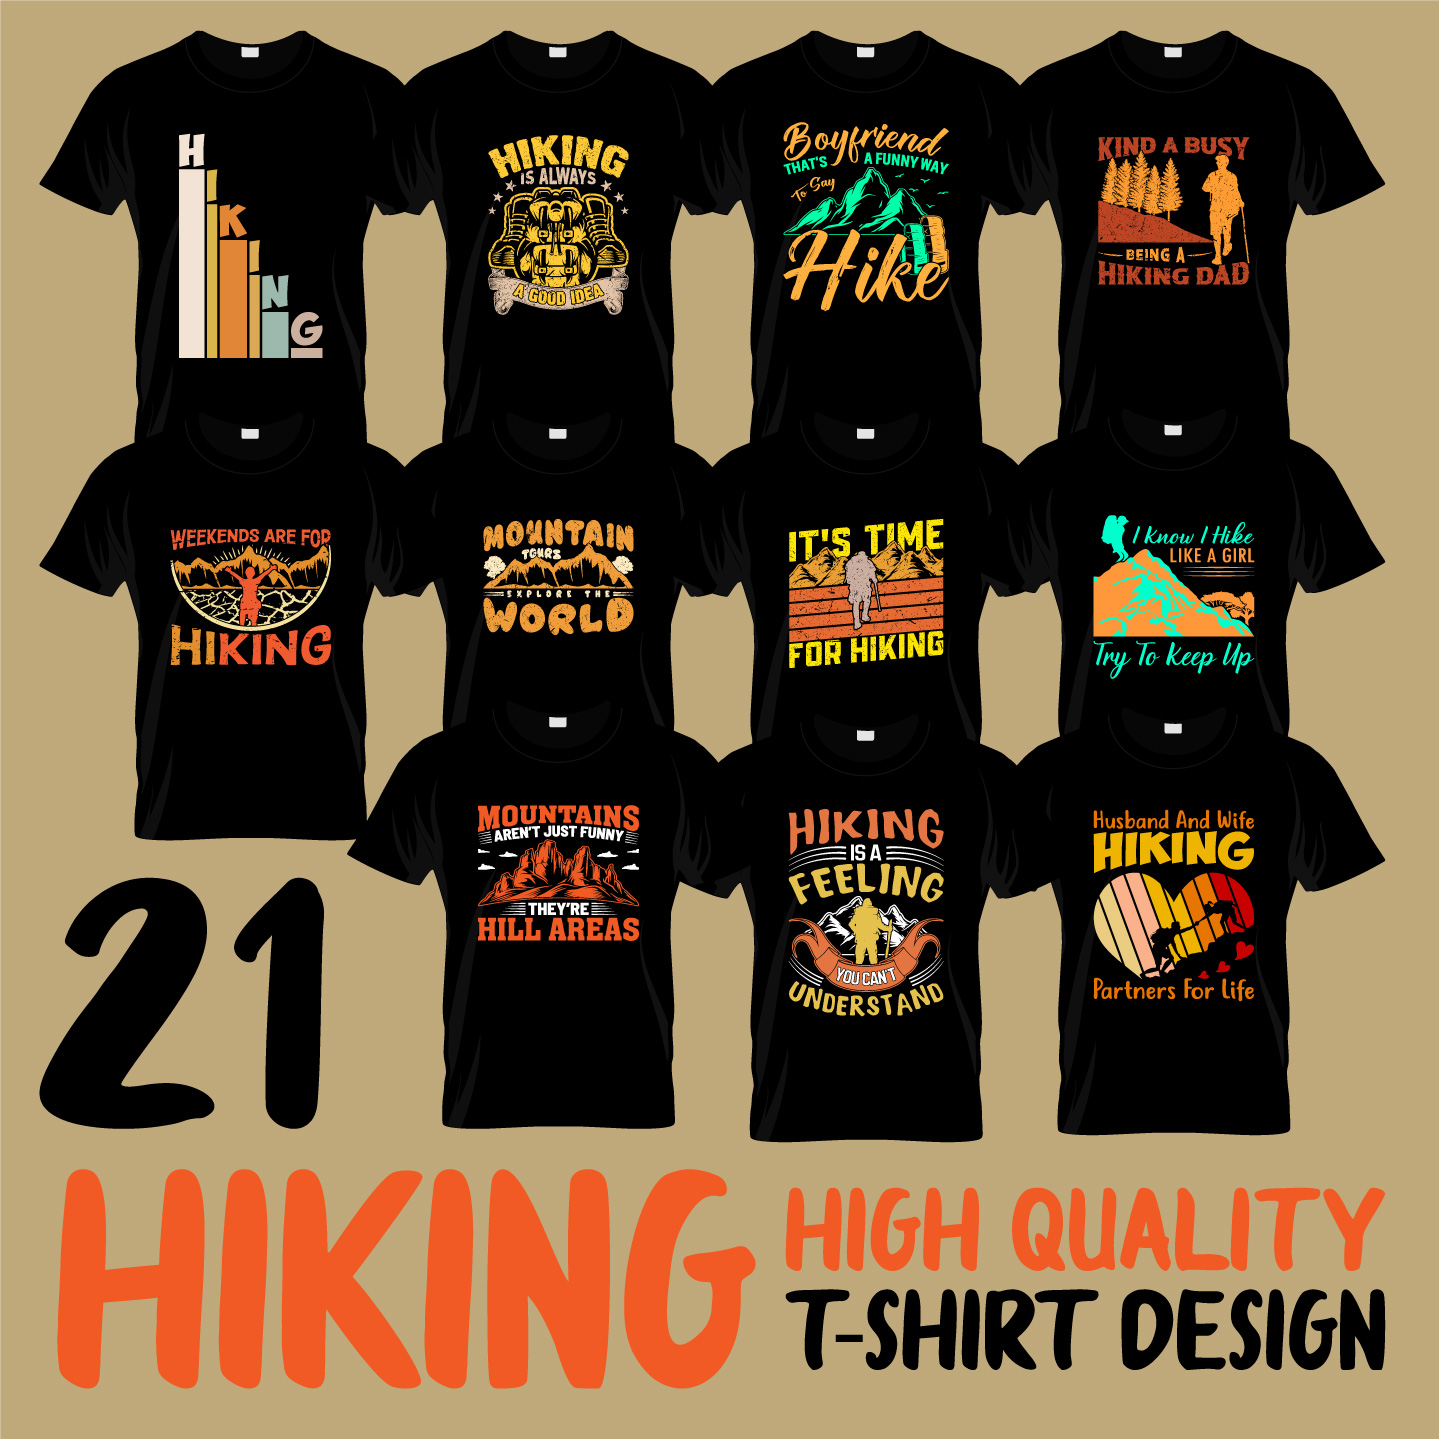 Best camping t-shirt design template with png files. - MasterBundles